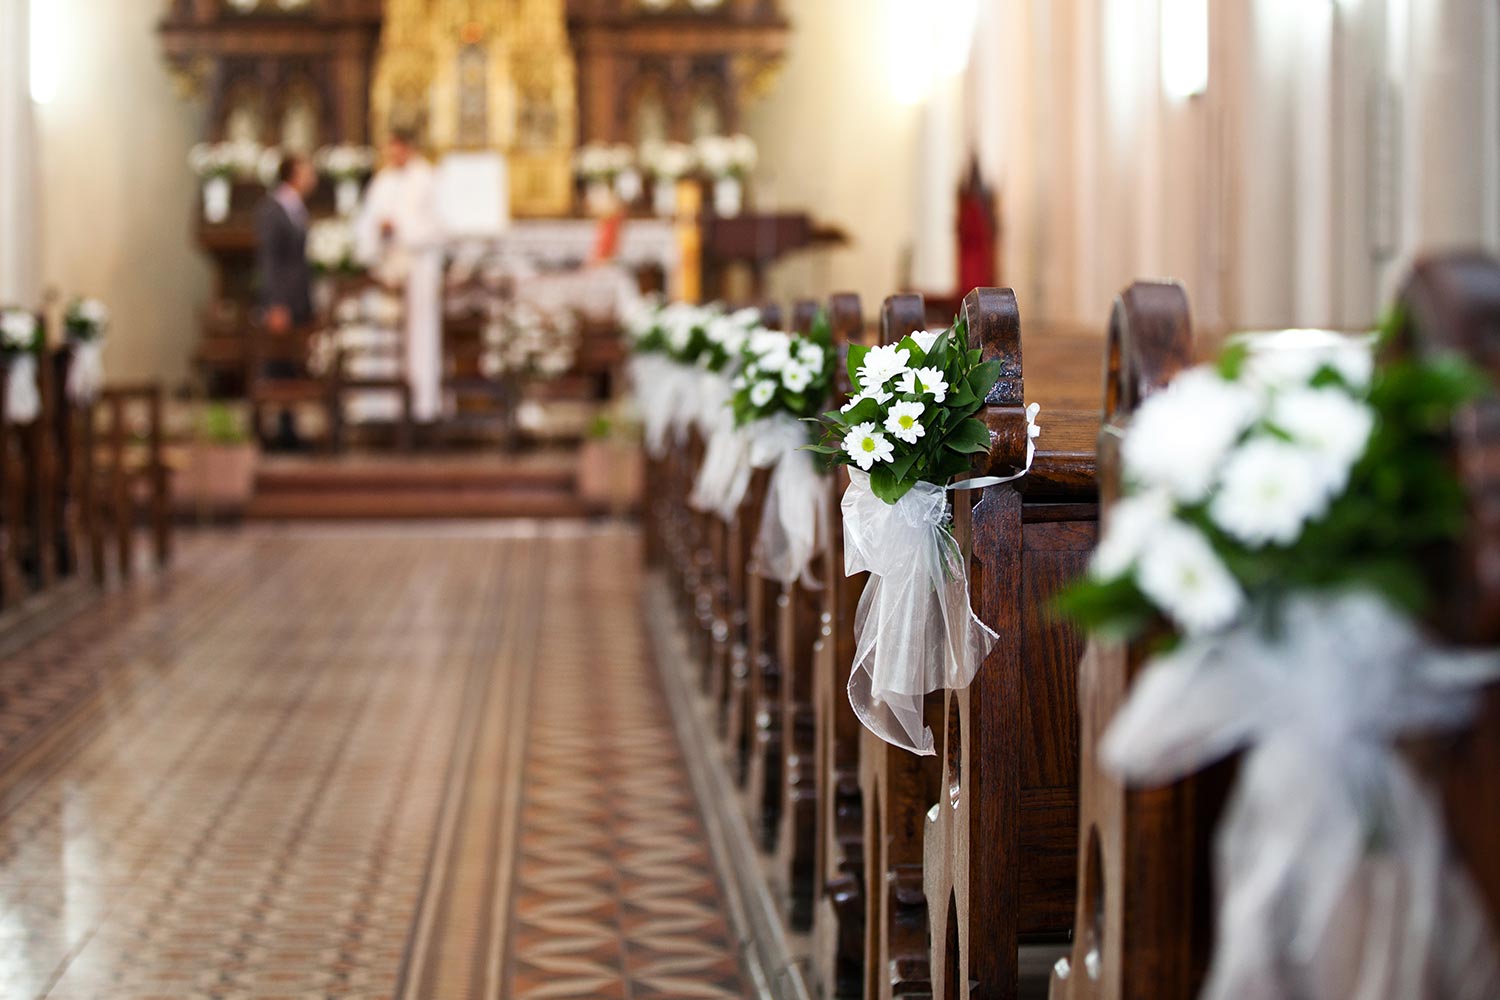 Church decorated with flower bouquets during the Wedding ceremony